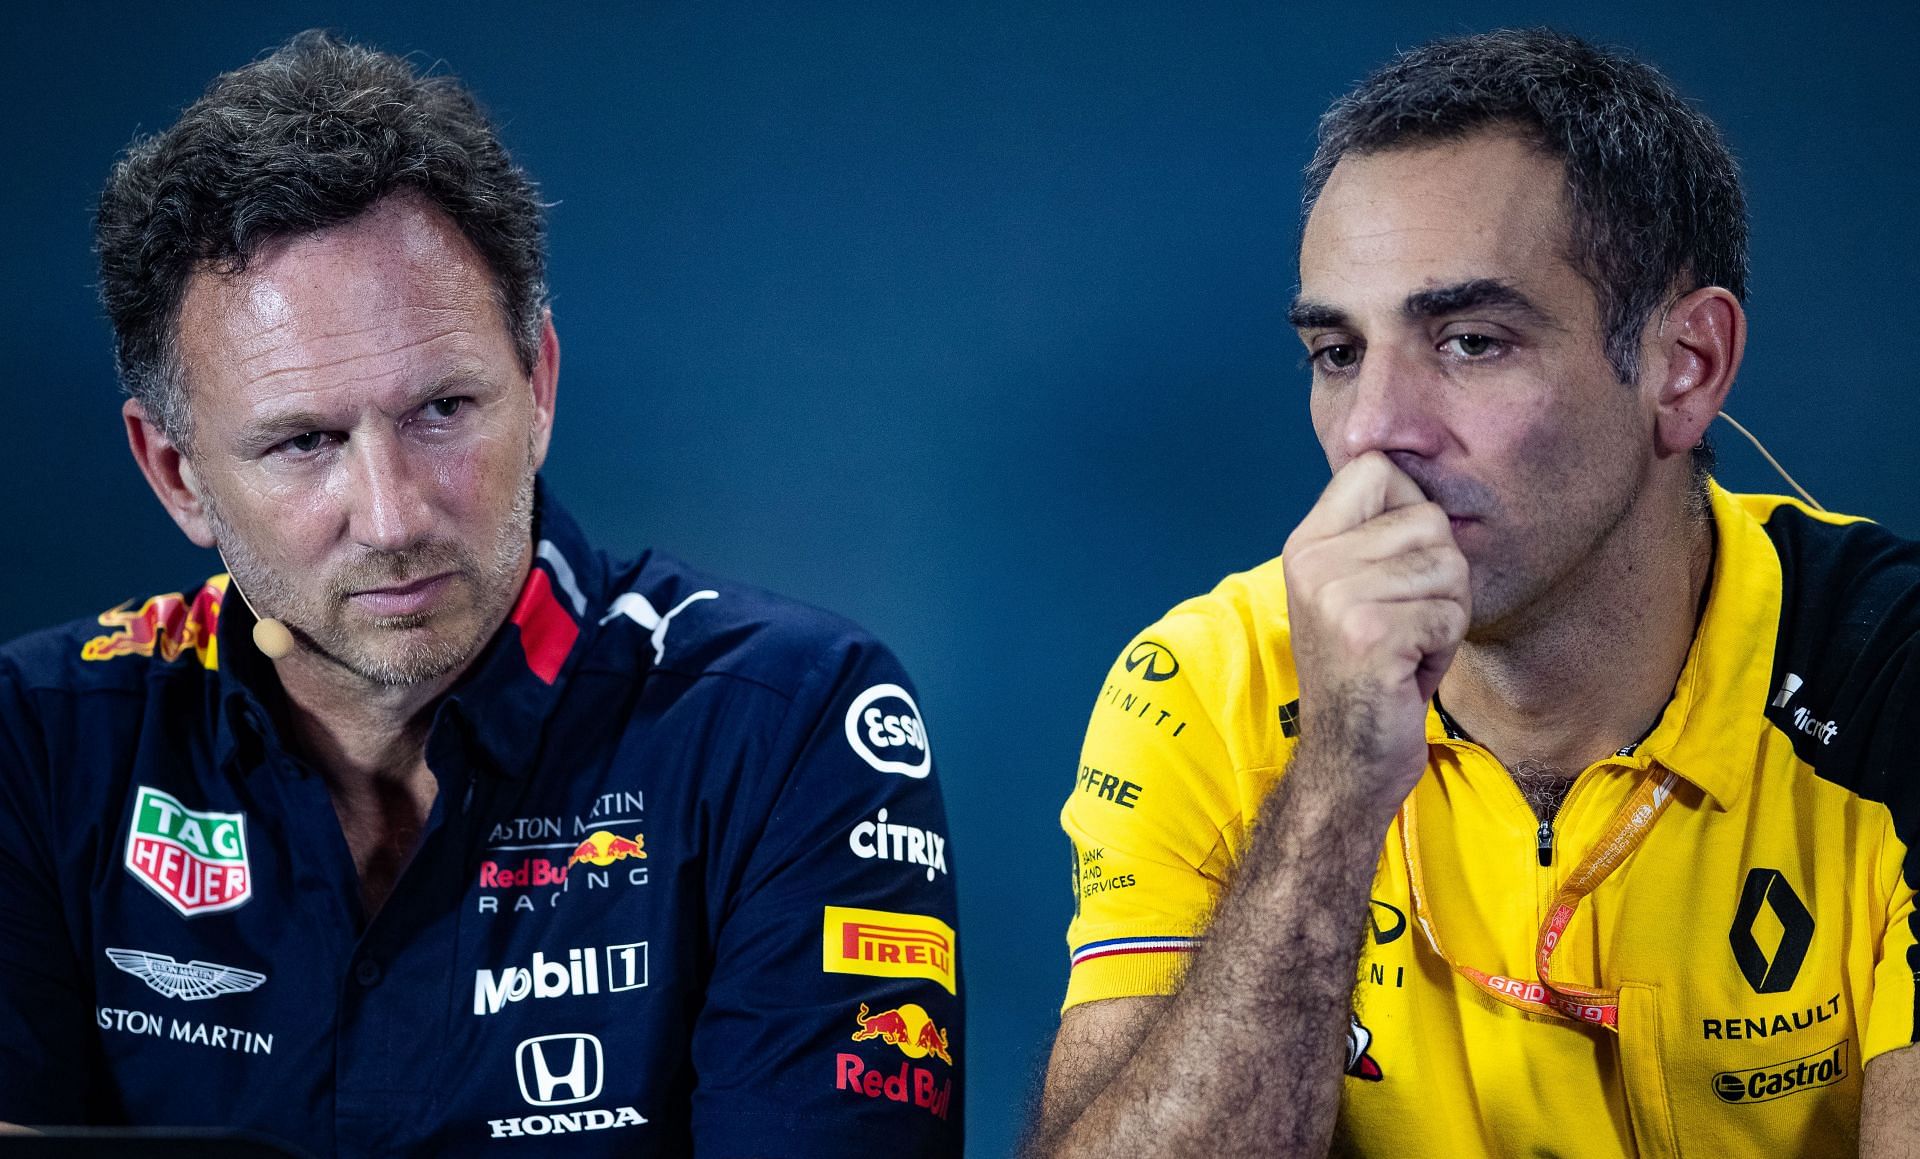 F1 Grand Prix of Singapore - Christian Horner (left) and Cyril Abiteboul attend a press conference (Photo by Lars Baron/Getty Images)